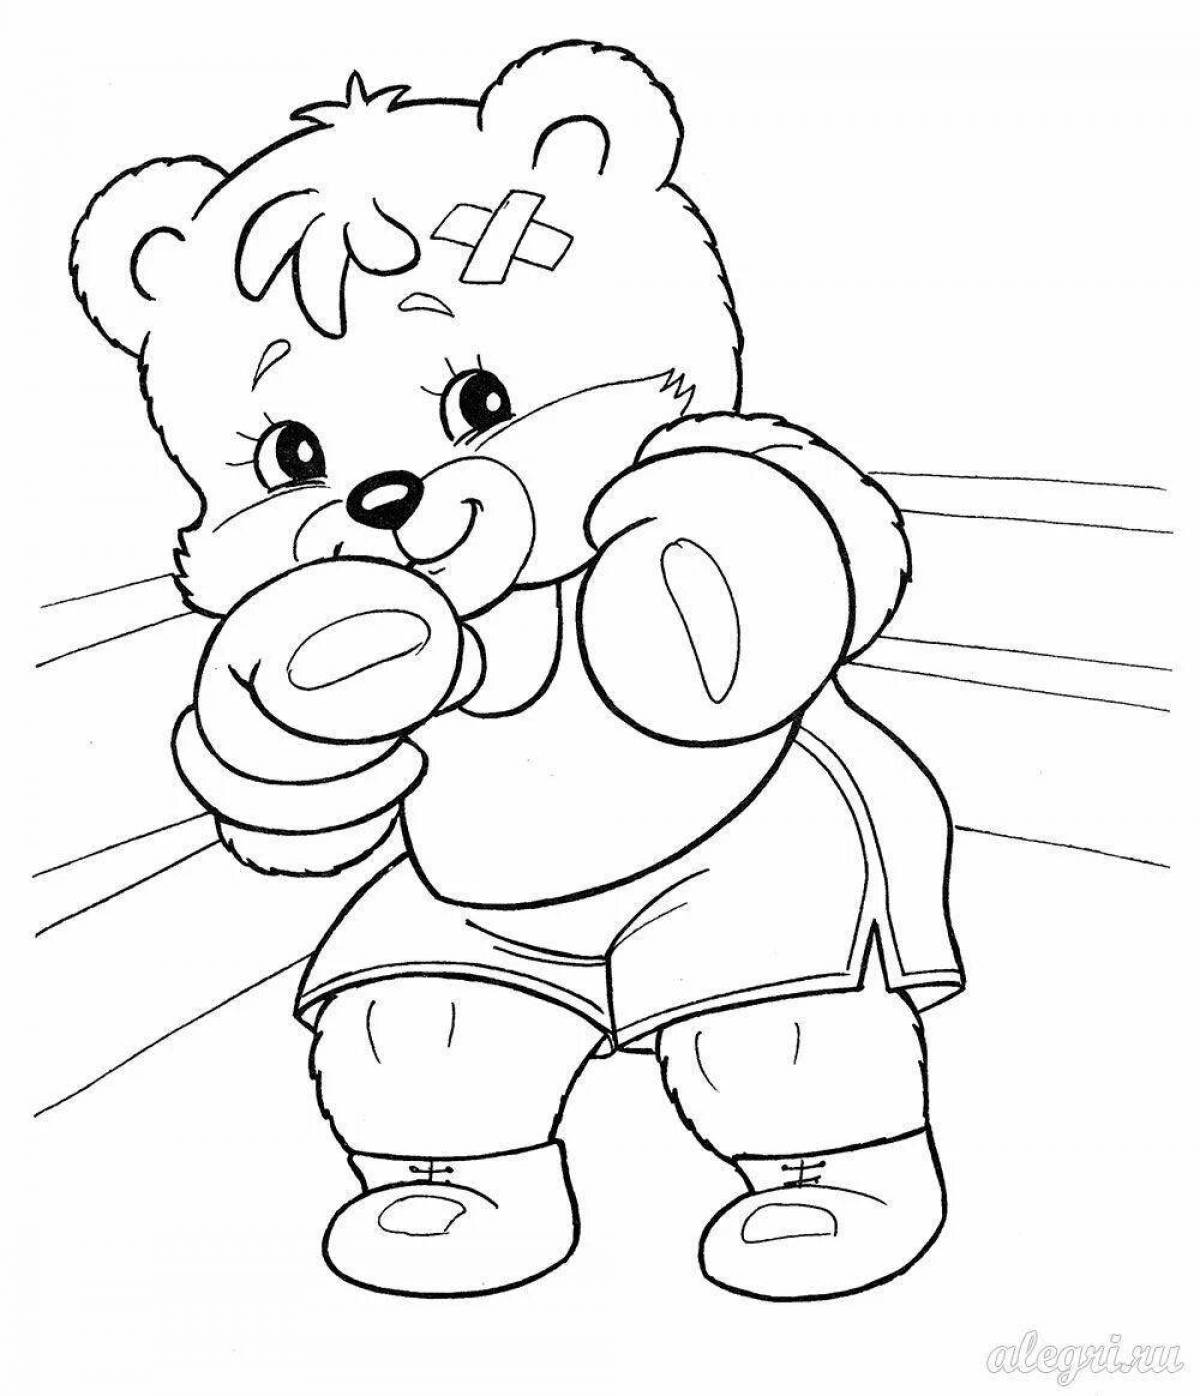 Gorgeous olympic bear coloring pages for kids